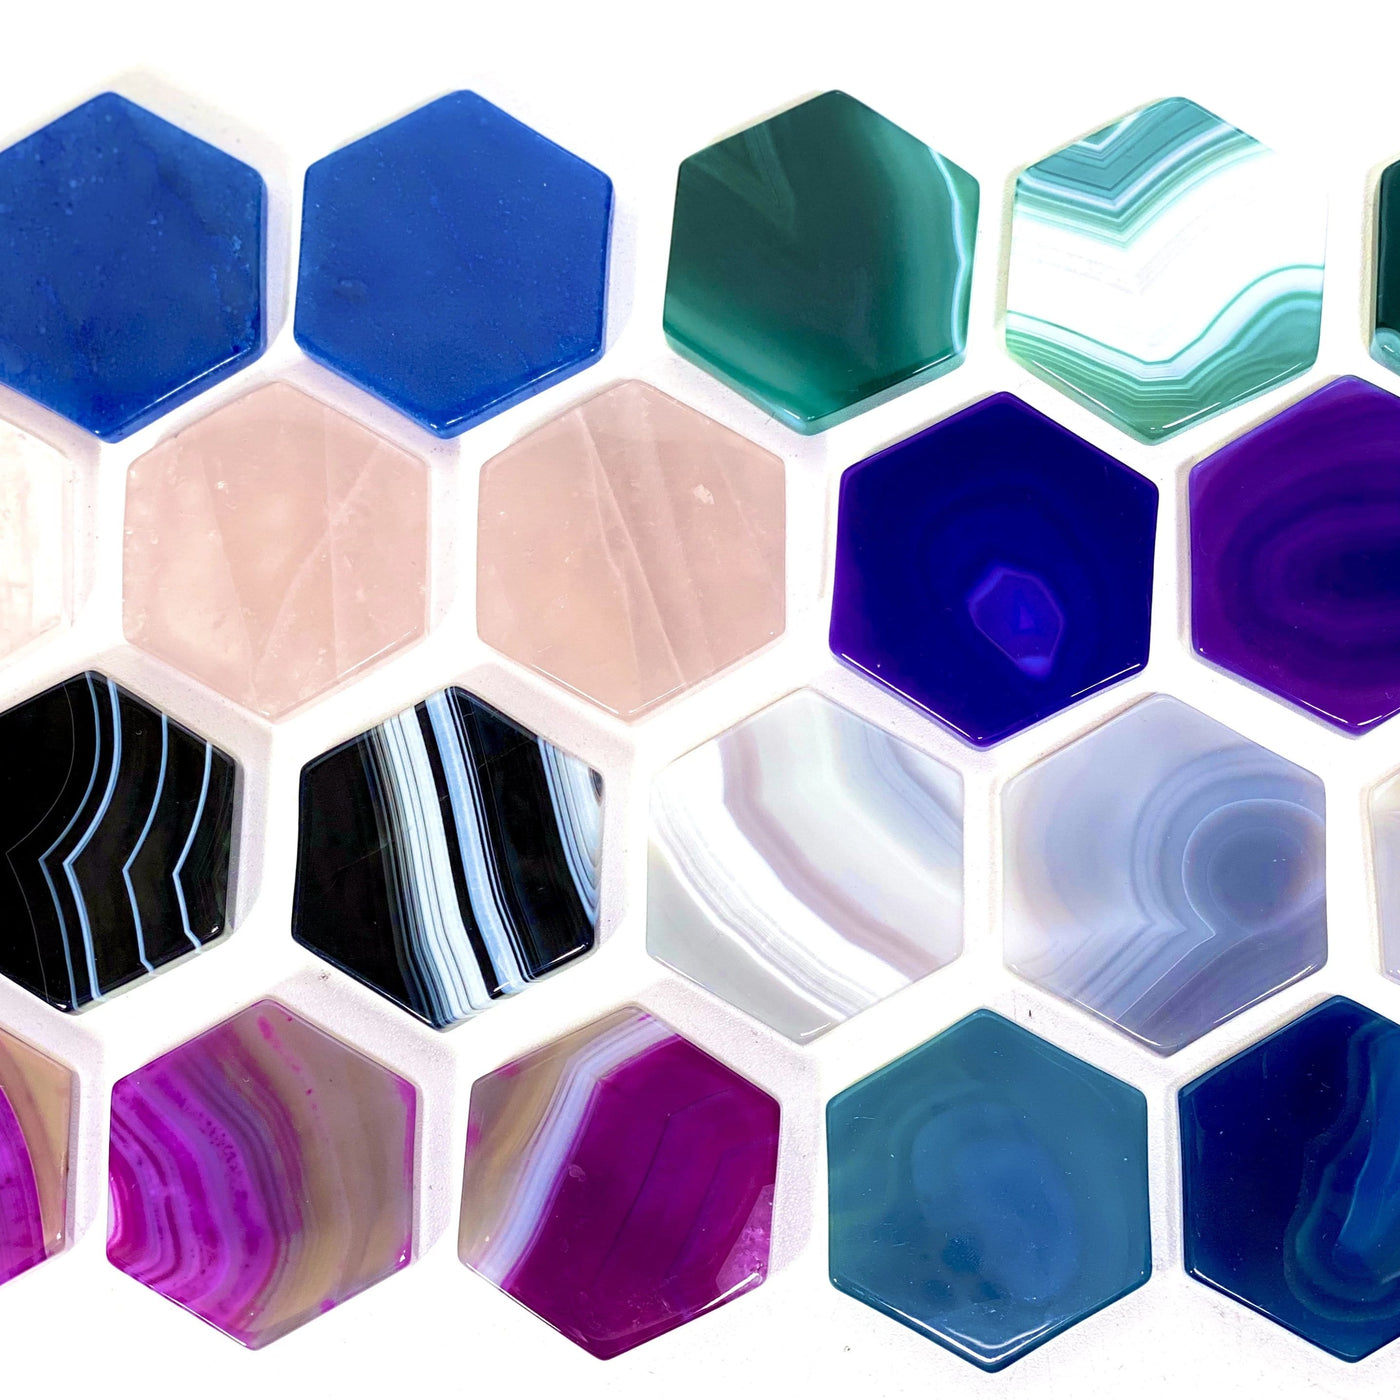 hexagon agate and quartz slices place cards displayed with white background